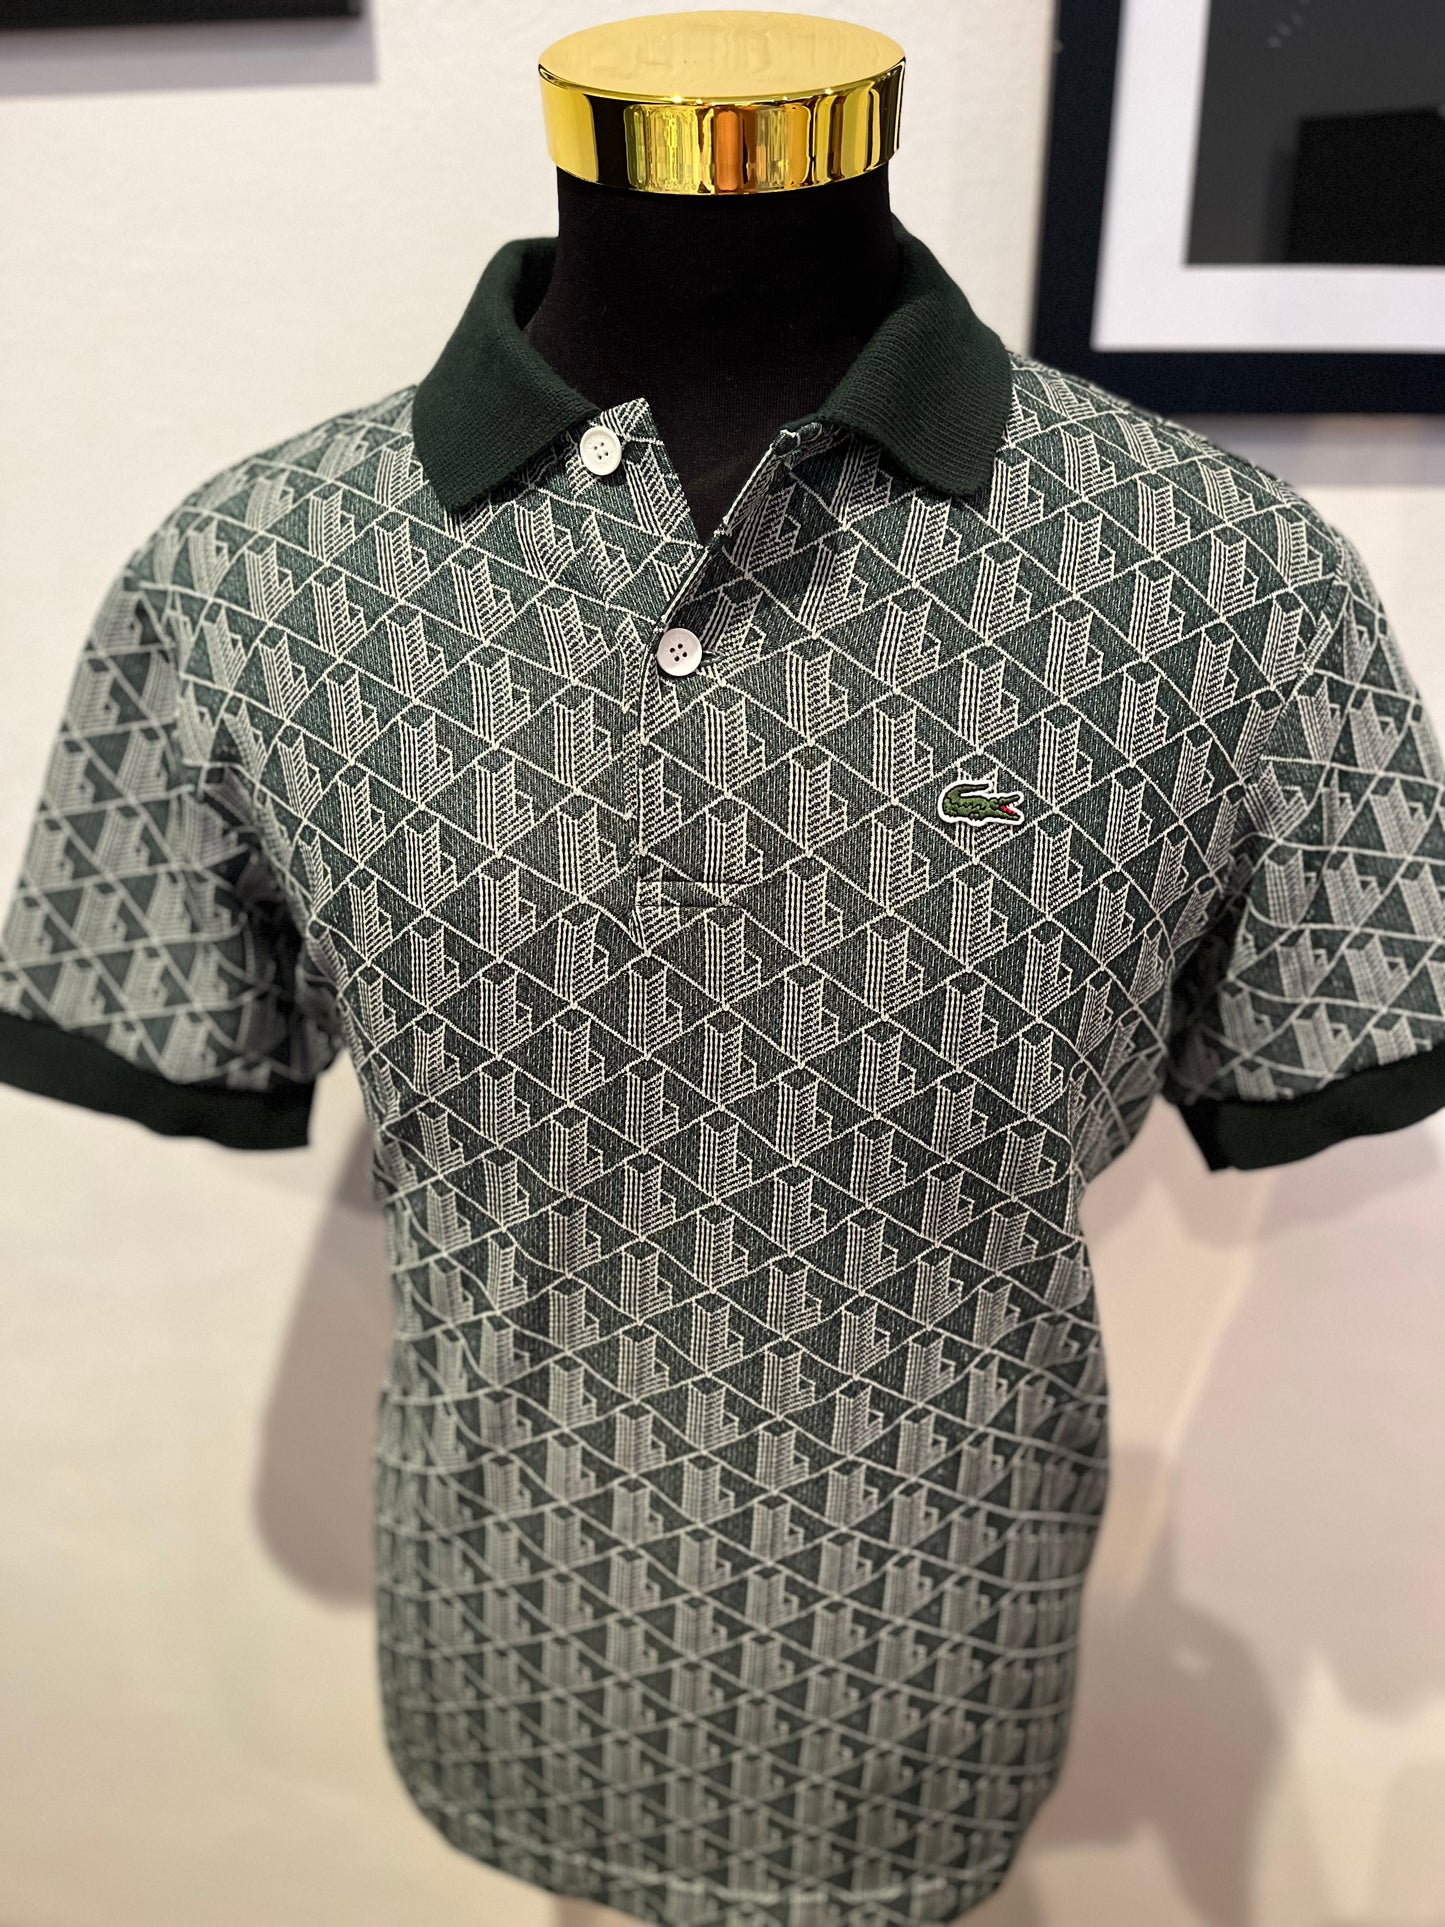 Lacoste 100% Cotton Green White Pattern Print Polo Shirt Size US Large Classic Fit